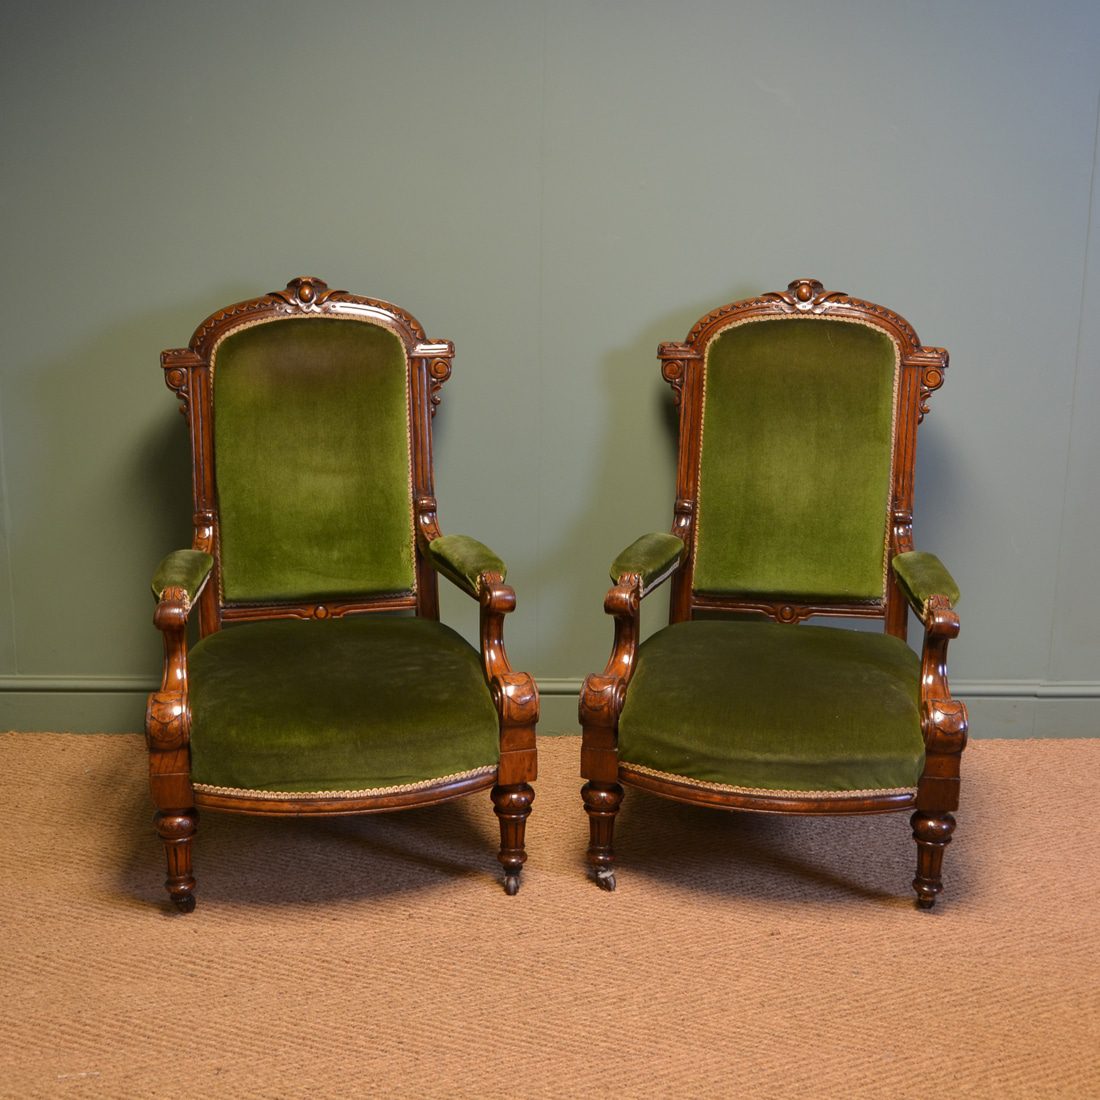 Antique Chair Styles and Designs